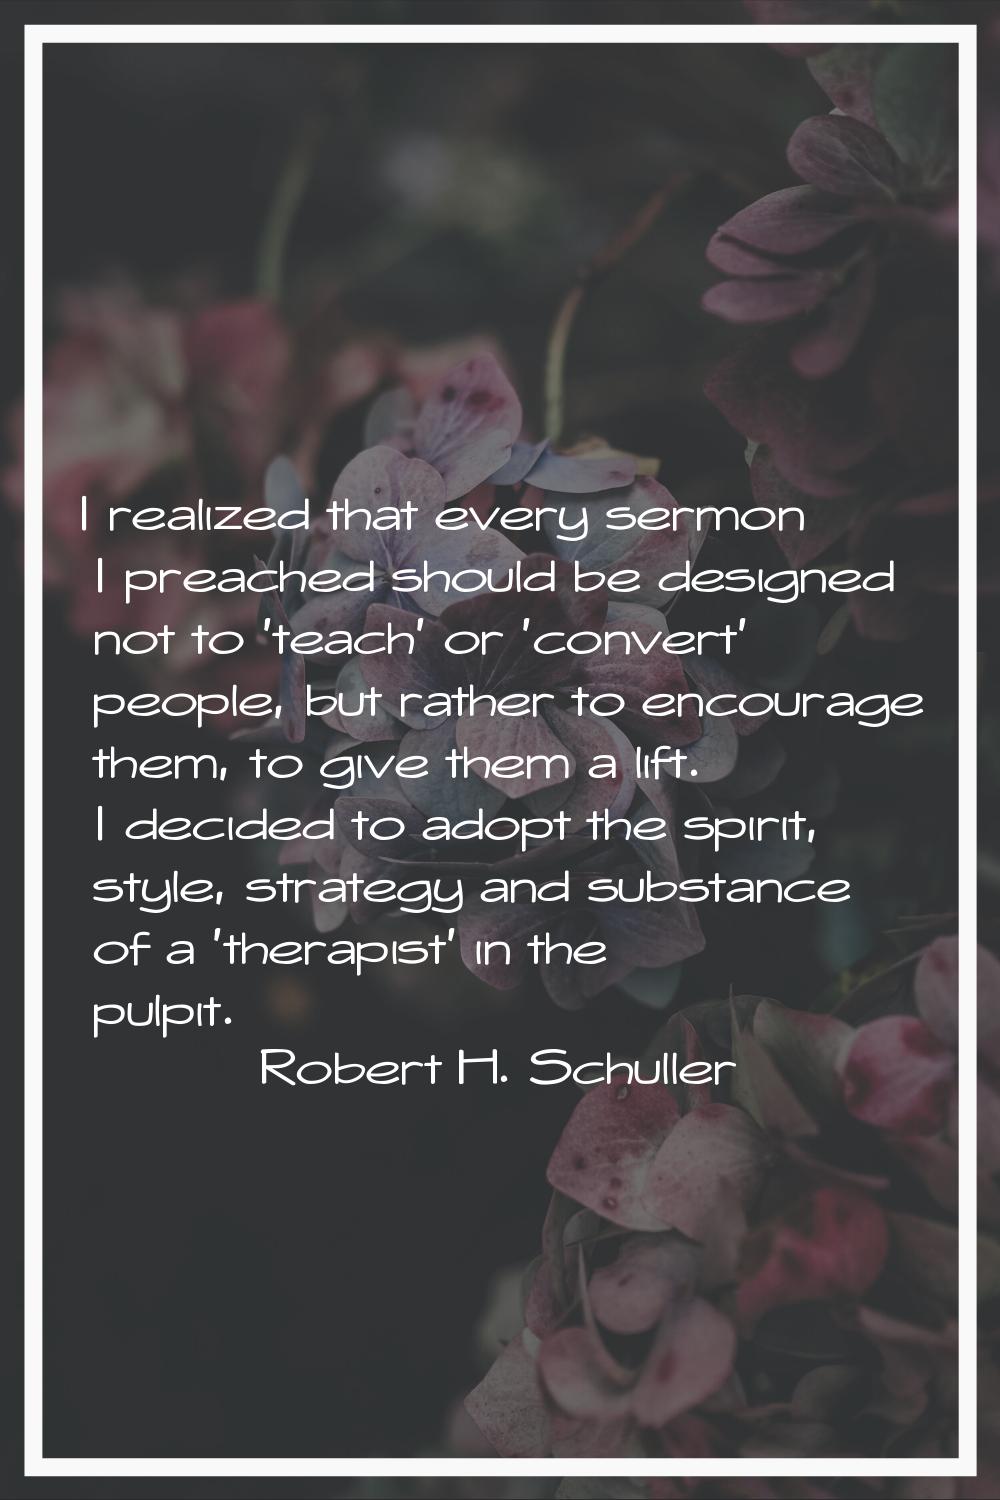 I realized that every sermon I preached should be designed not to 'teach' or 'convert' people, but 